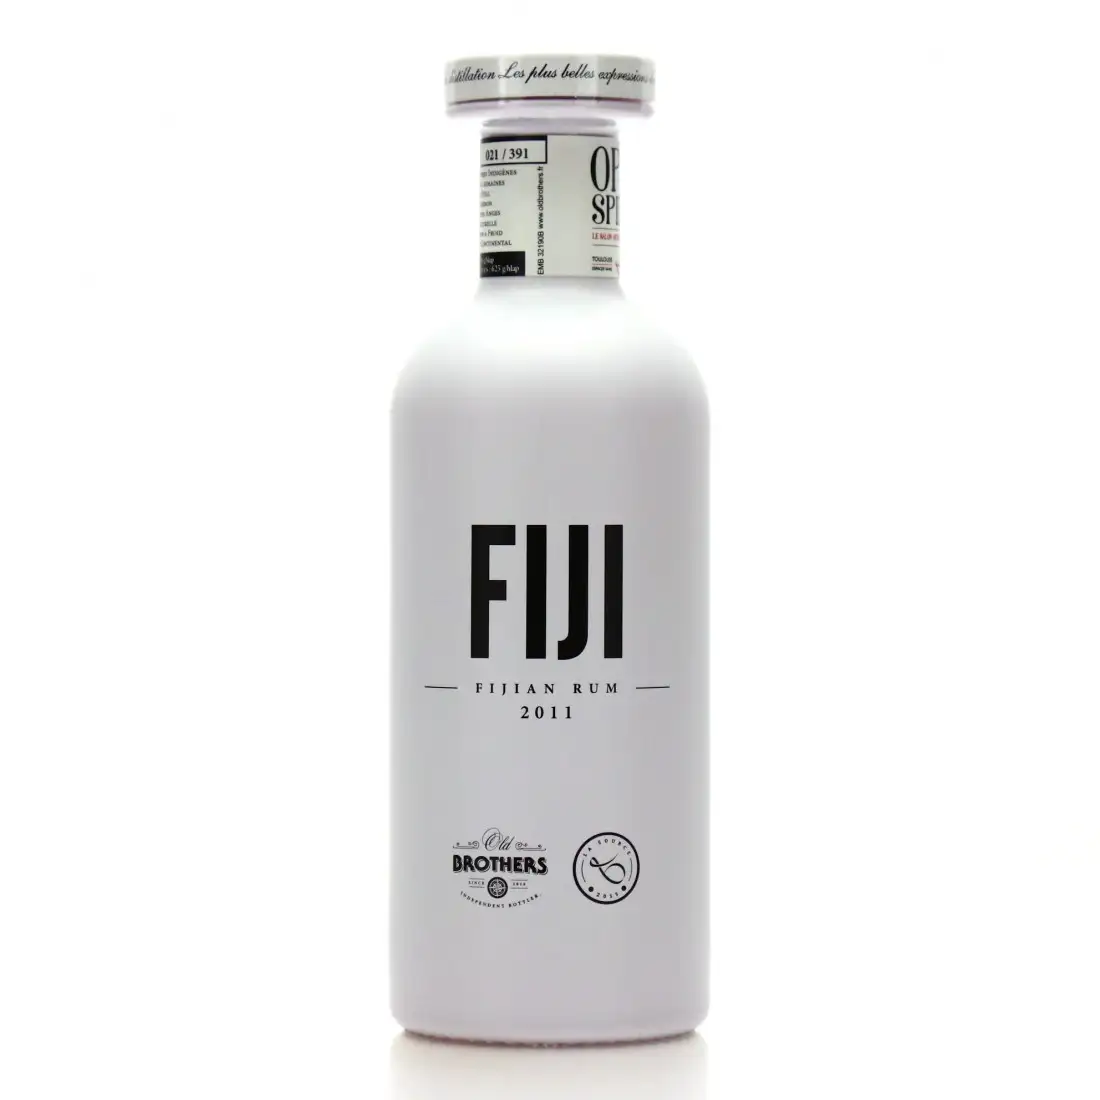 Image of the front of the bottle of the rum Fiji